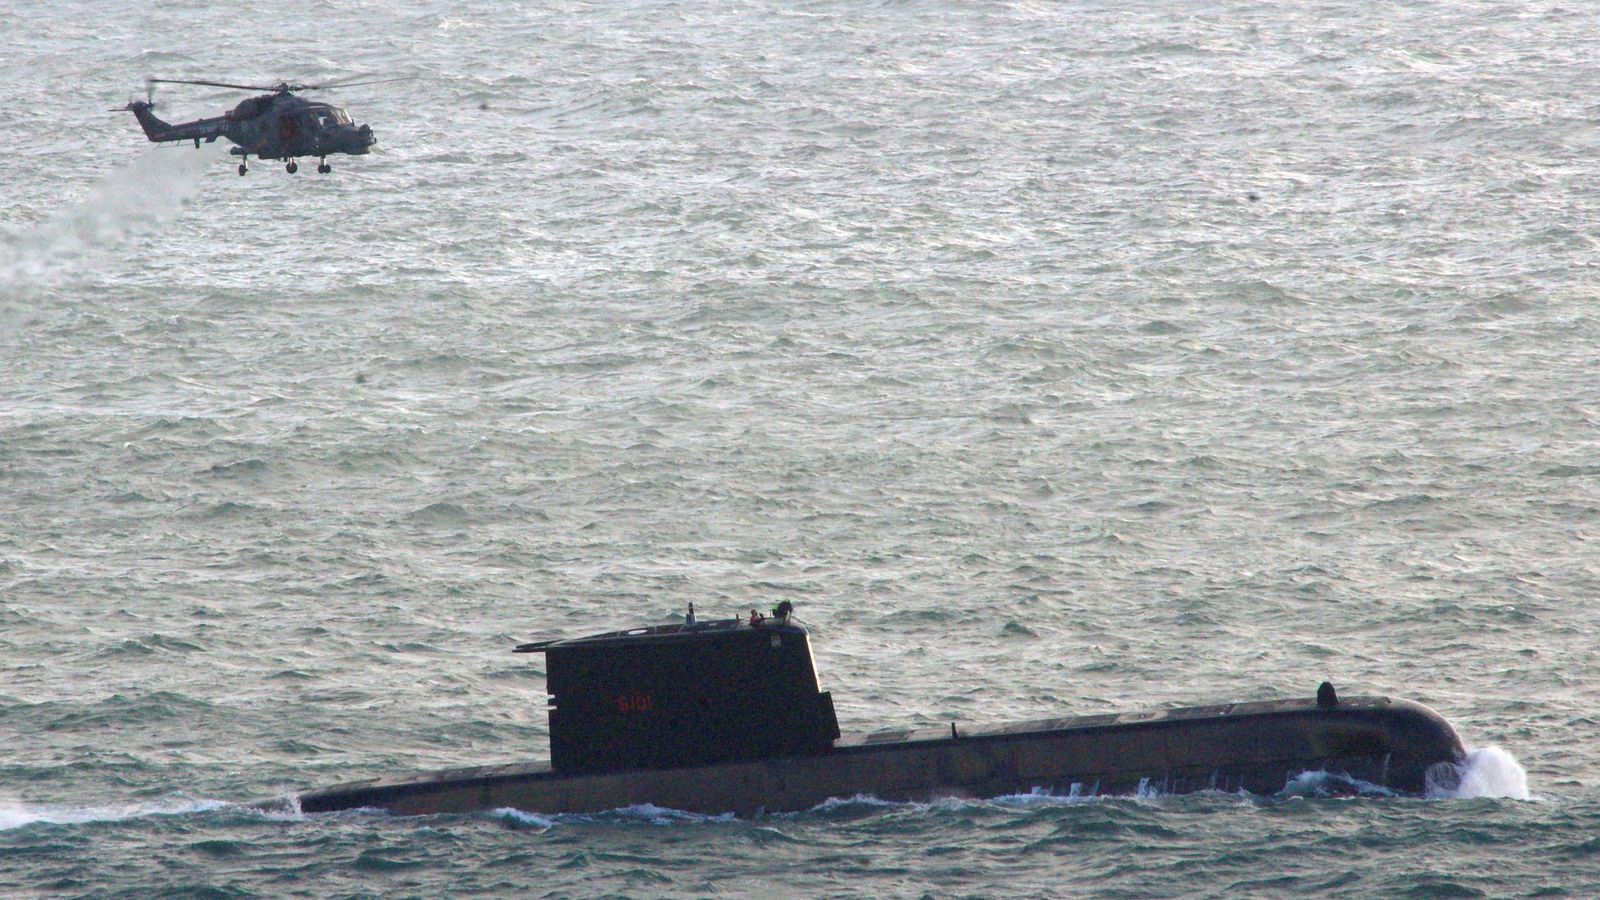 Three South African navy personnel die after being swept off submarine deck by large waves